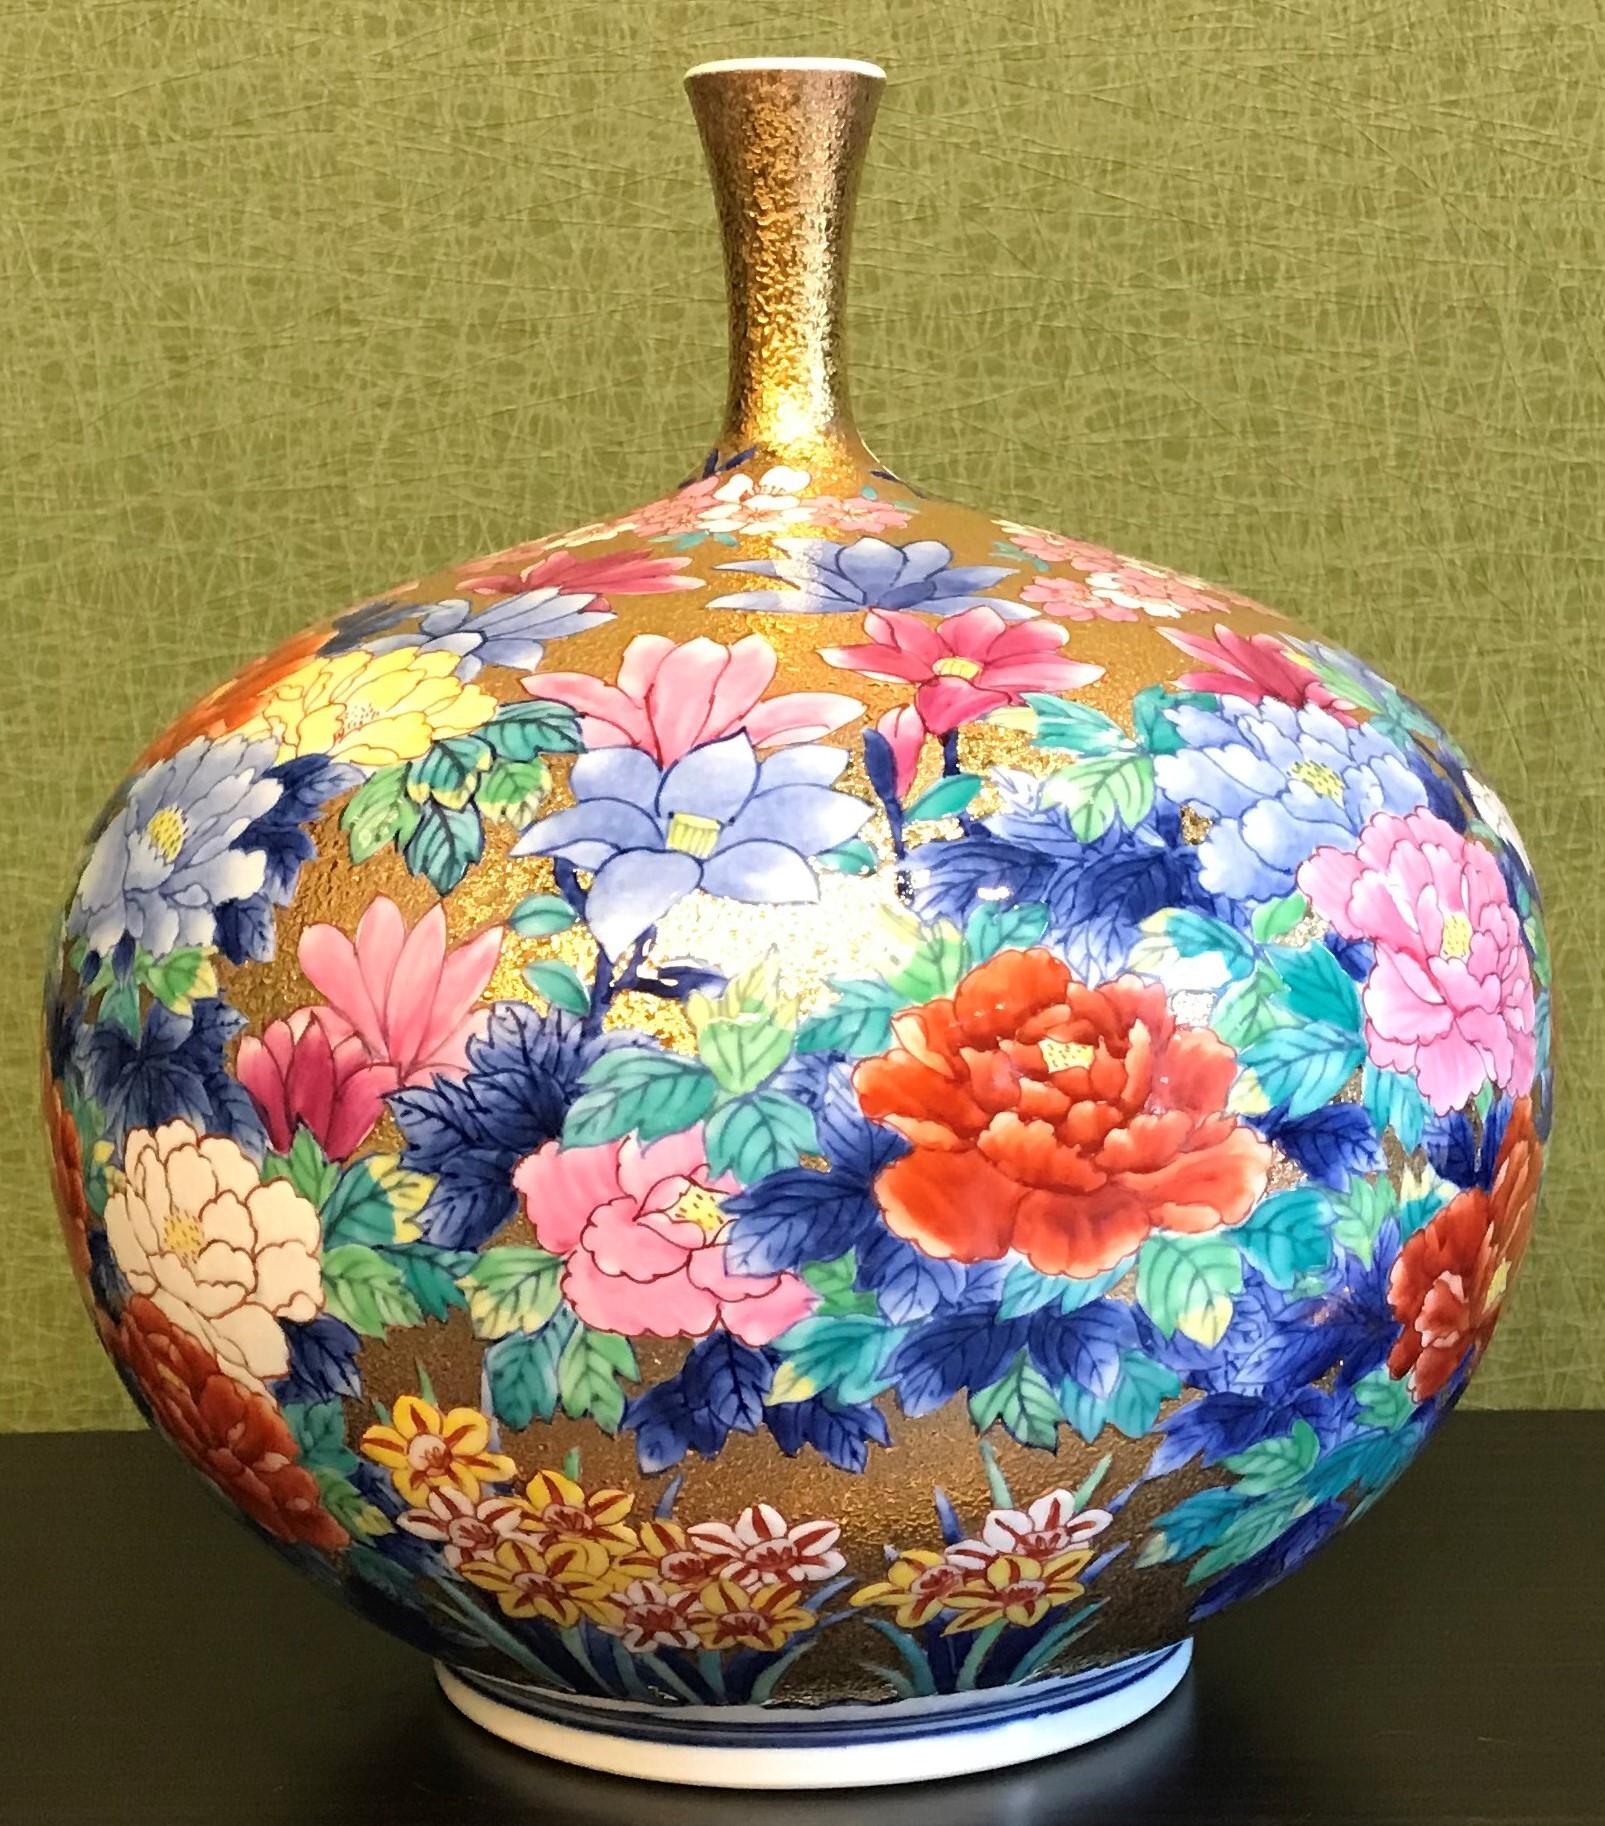 Mesmerizing contemporary Japanese decorative porcelain vase, gilded and hand painted on a stunningly shaped ovoid body, a masterpiece by an acclaimed and award-winning master porcelain artist from the Imari-Arita region of Japan. This artist is